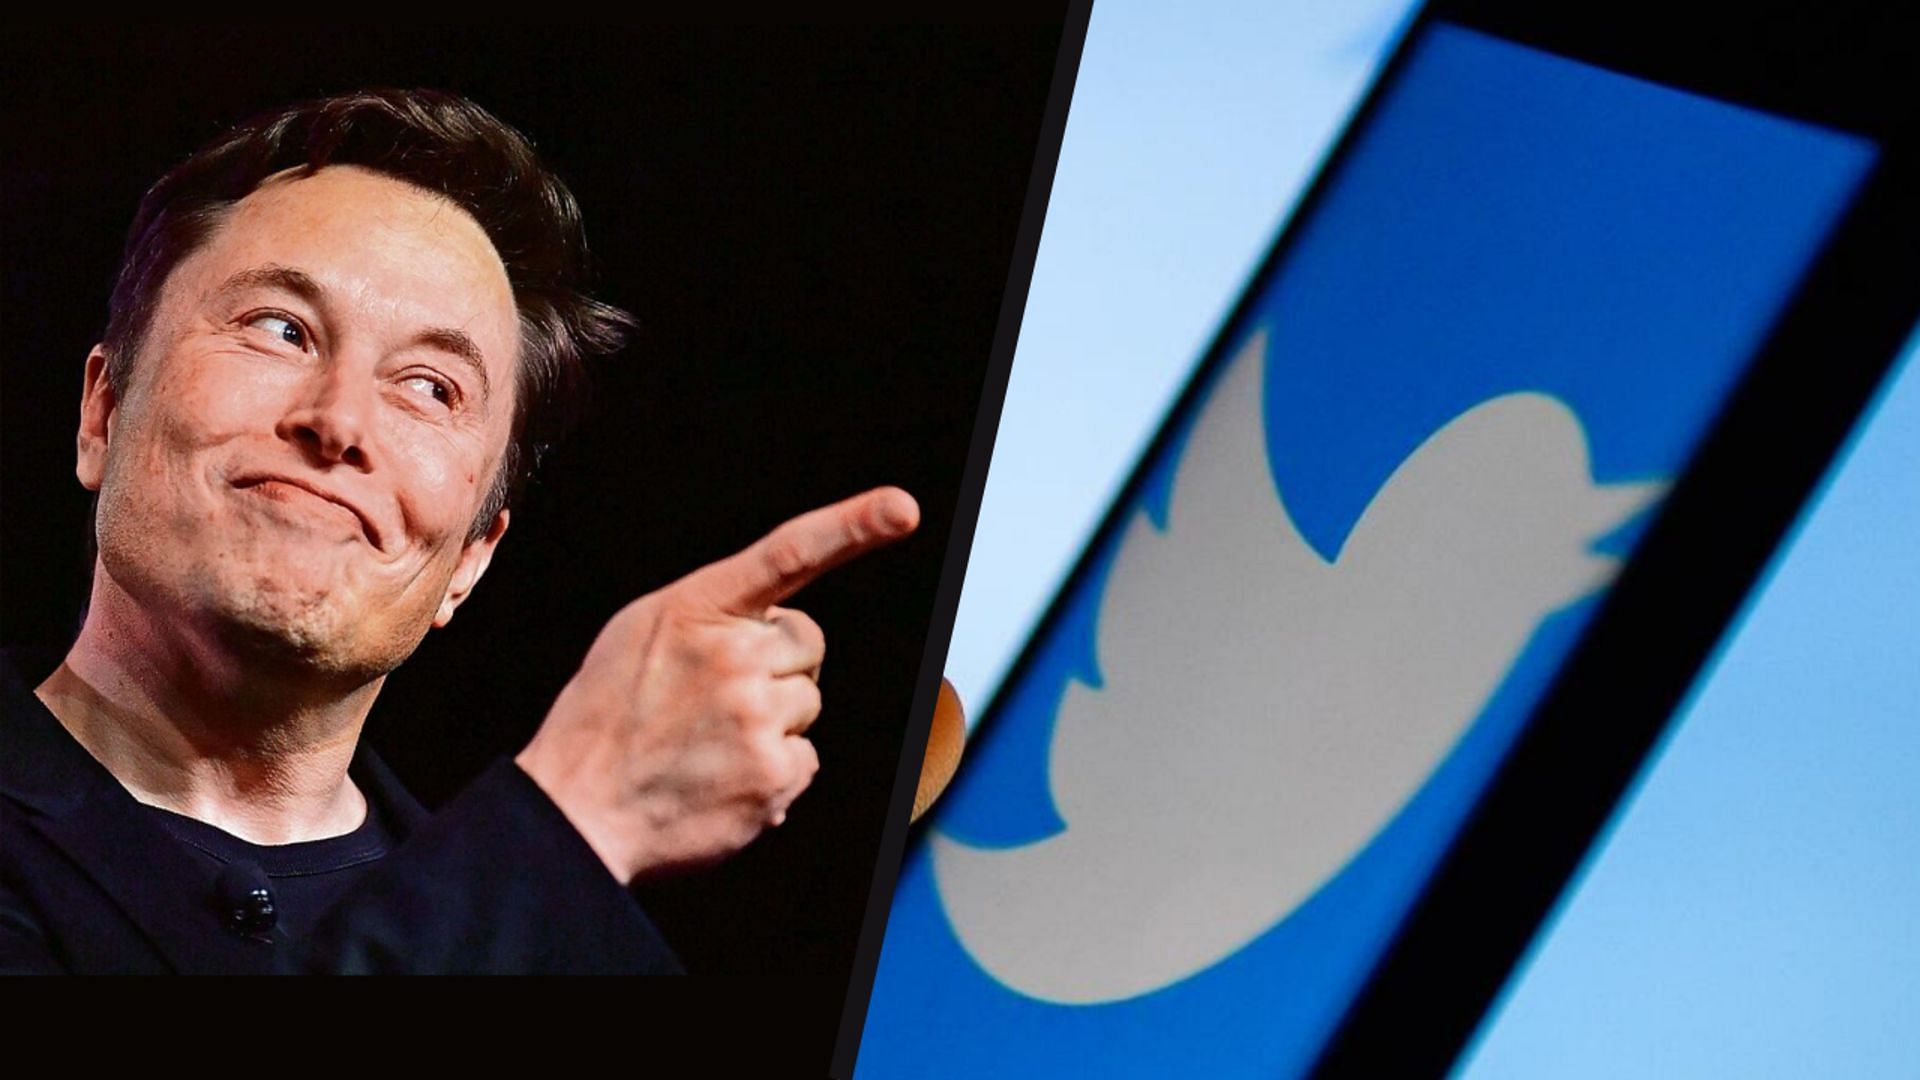 Musk acquires 9.2 percent stake in Twitter (Image via Frederic J. Brown/Getty Images, and Omar Marques/SOPA Images/LightRocket/Getty Images)